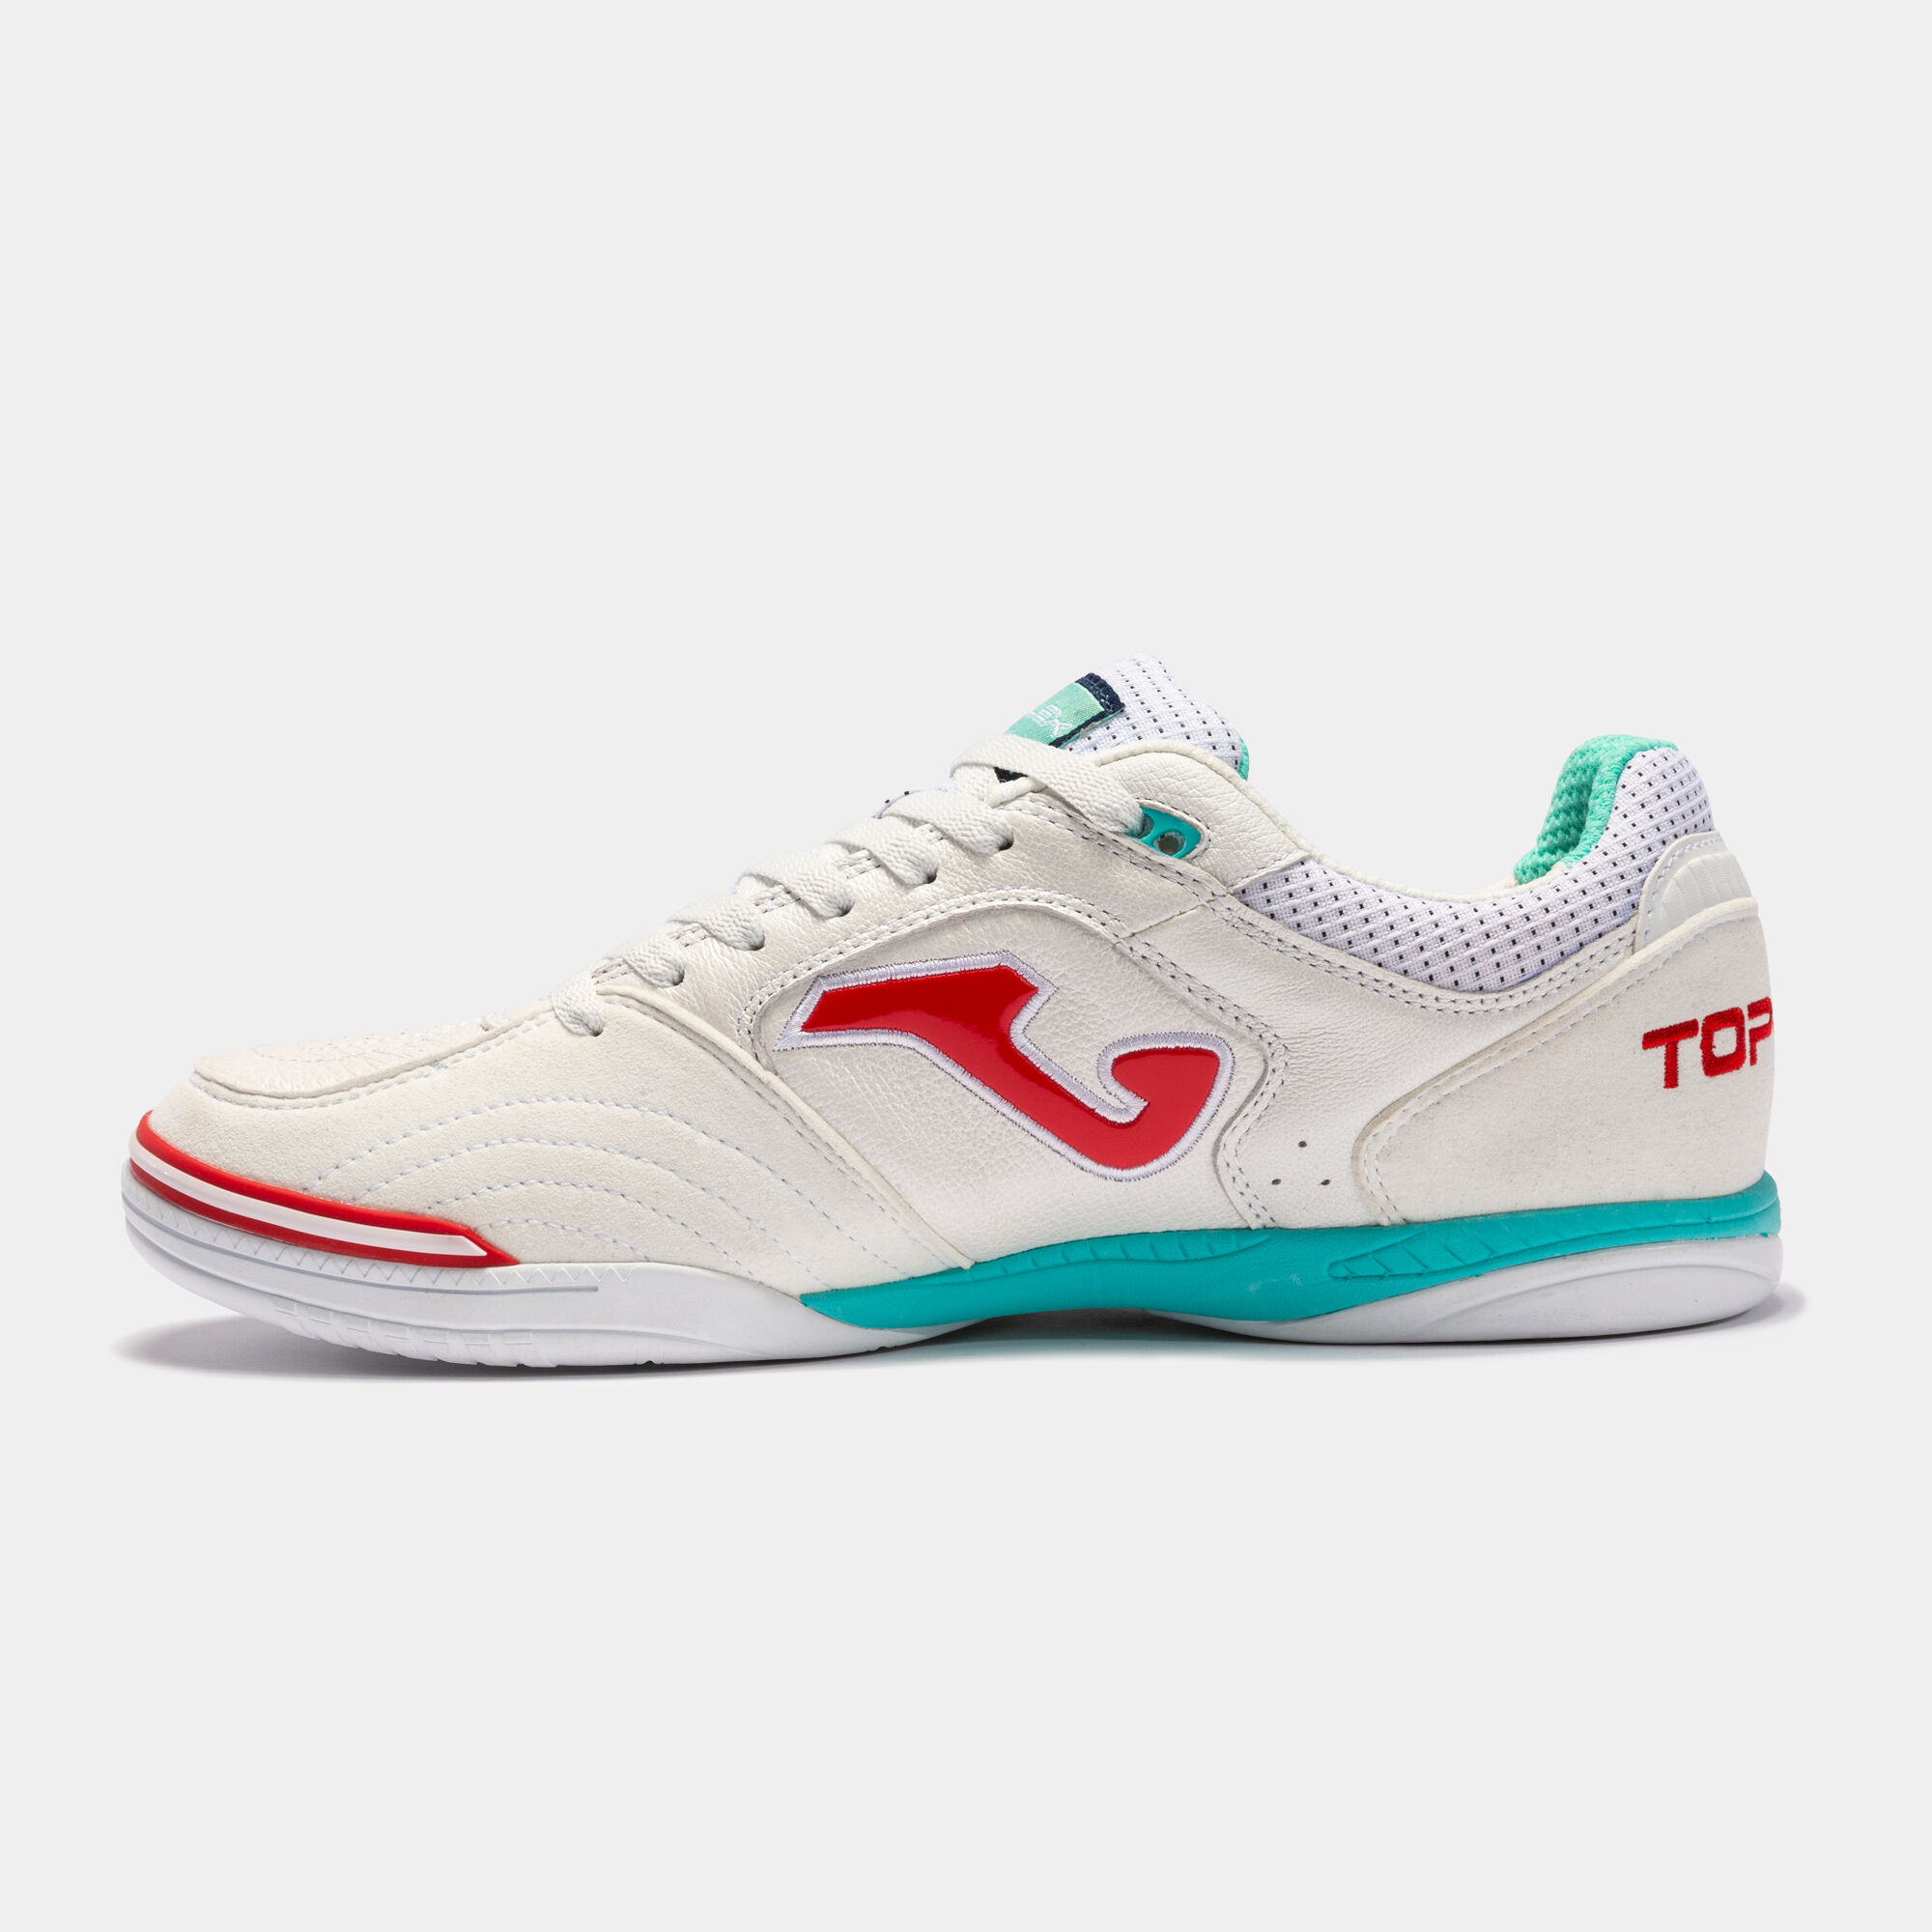 FUTSAL SHOES TOP FLEX 22 INDOOR WHITE TURQUOISE